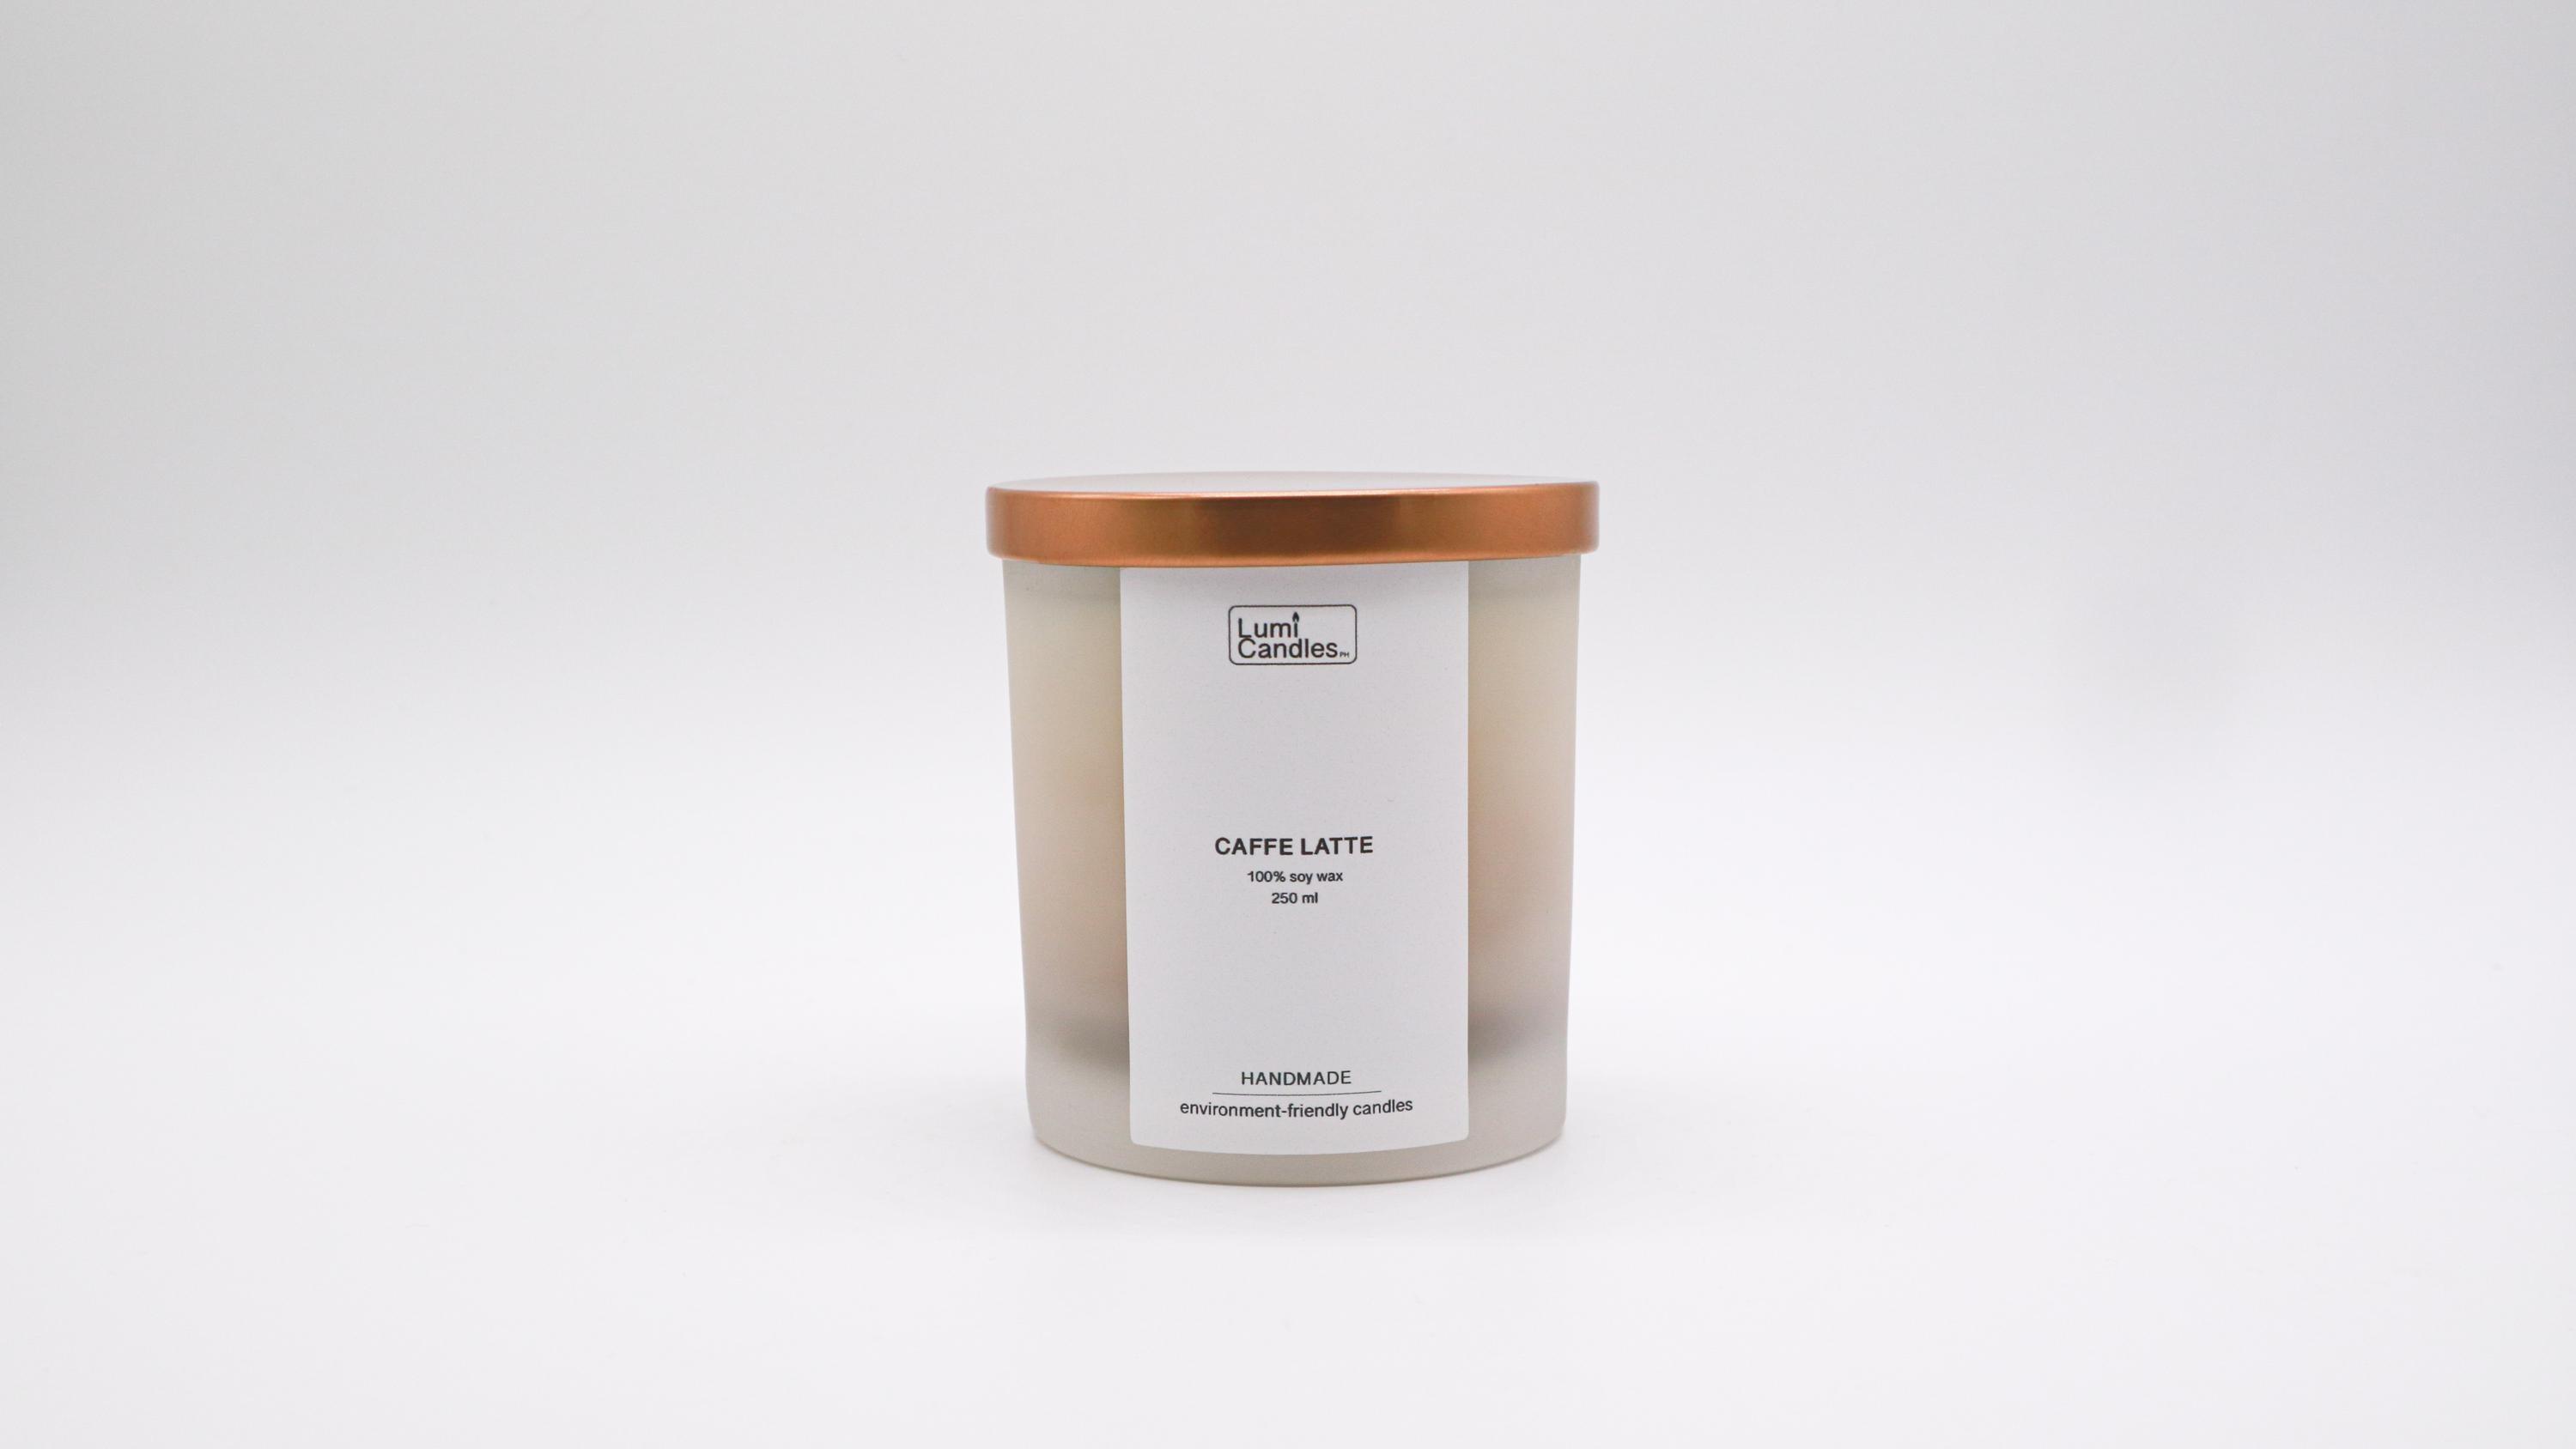 Caffe Latte LUMI scented candle at 250 ML by LUMI Candles PH